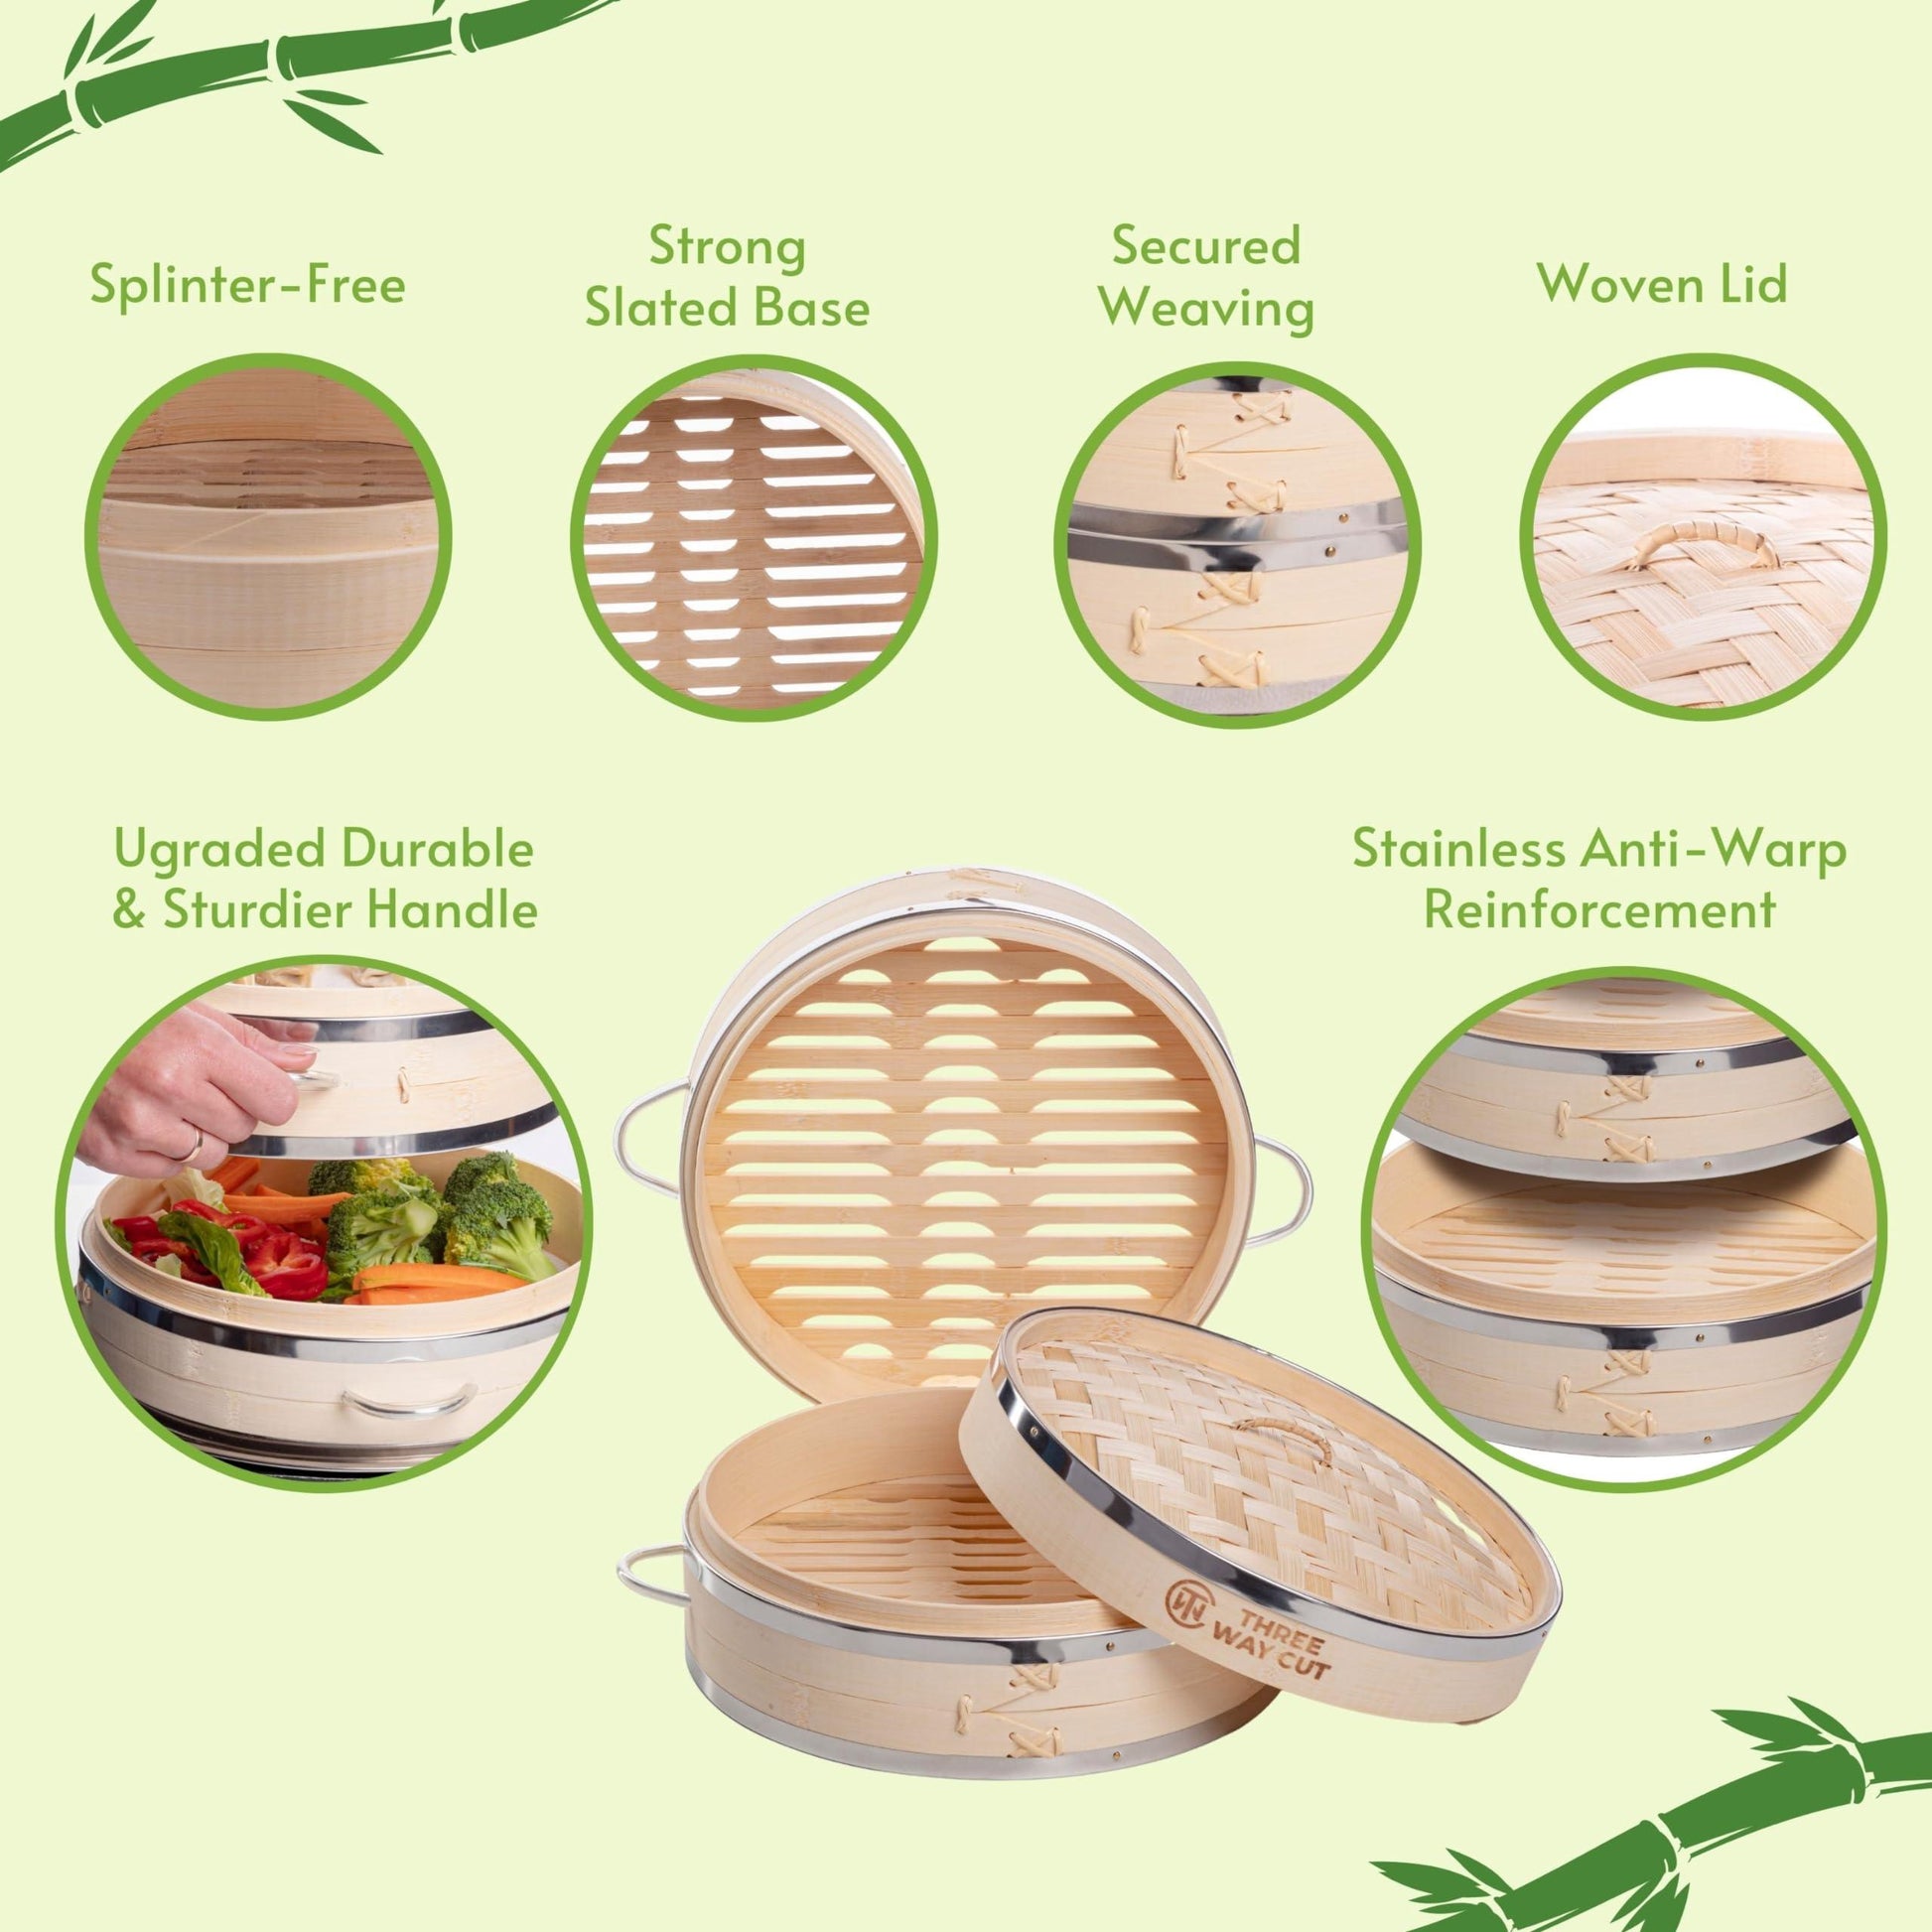 Dumpling Bamboo Steamer 10 Inch 2 Tier Wooden Basket With Handle, Reusable Silicone Liner, Kit For Cooking Baby Bao Bun, Dim Sum, Rice Potsticker Steaming Chinese Asian Food & Vegetables - CookCave